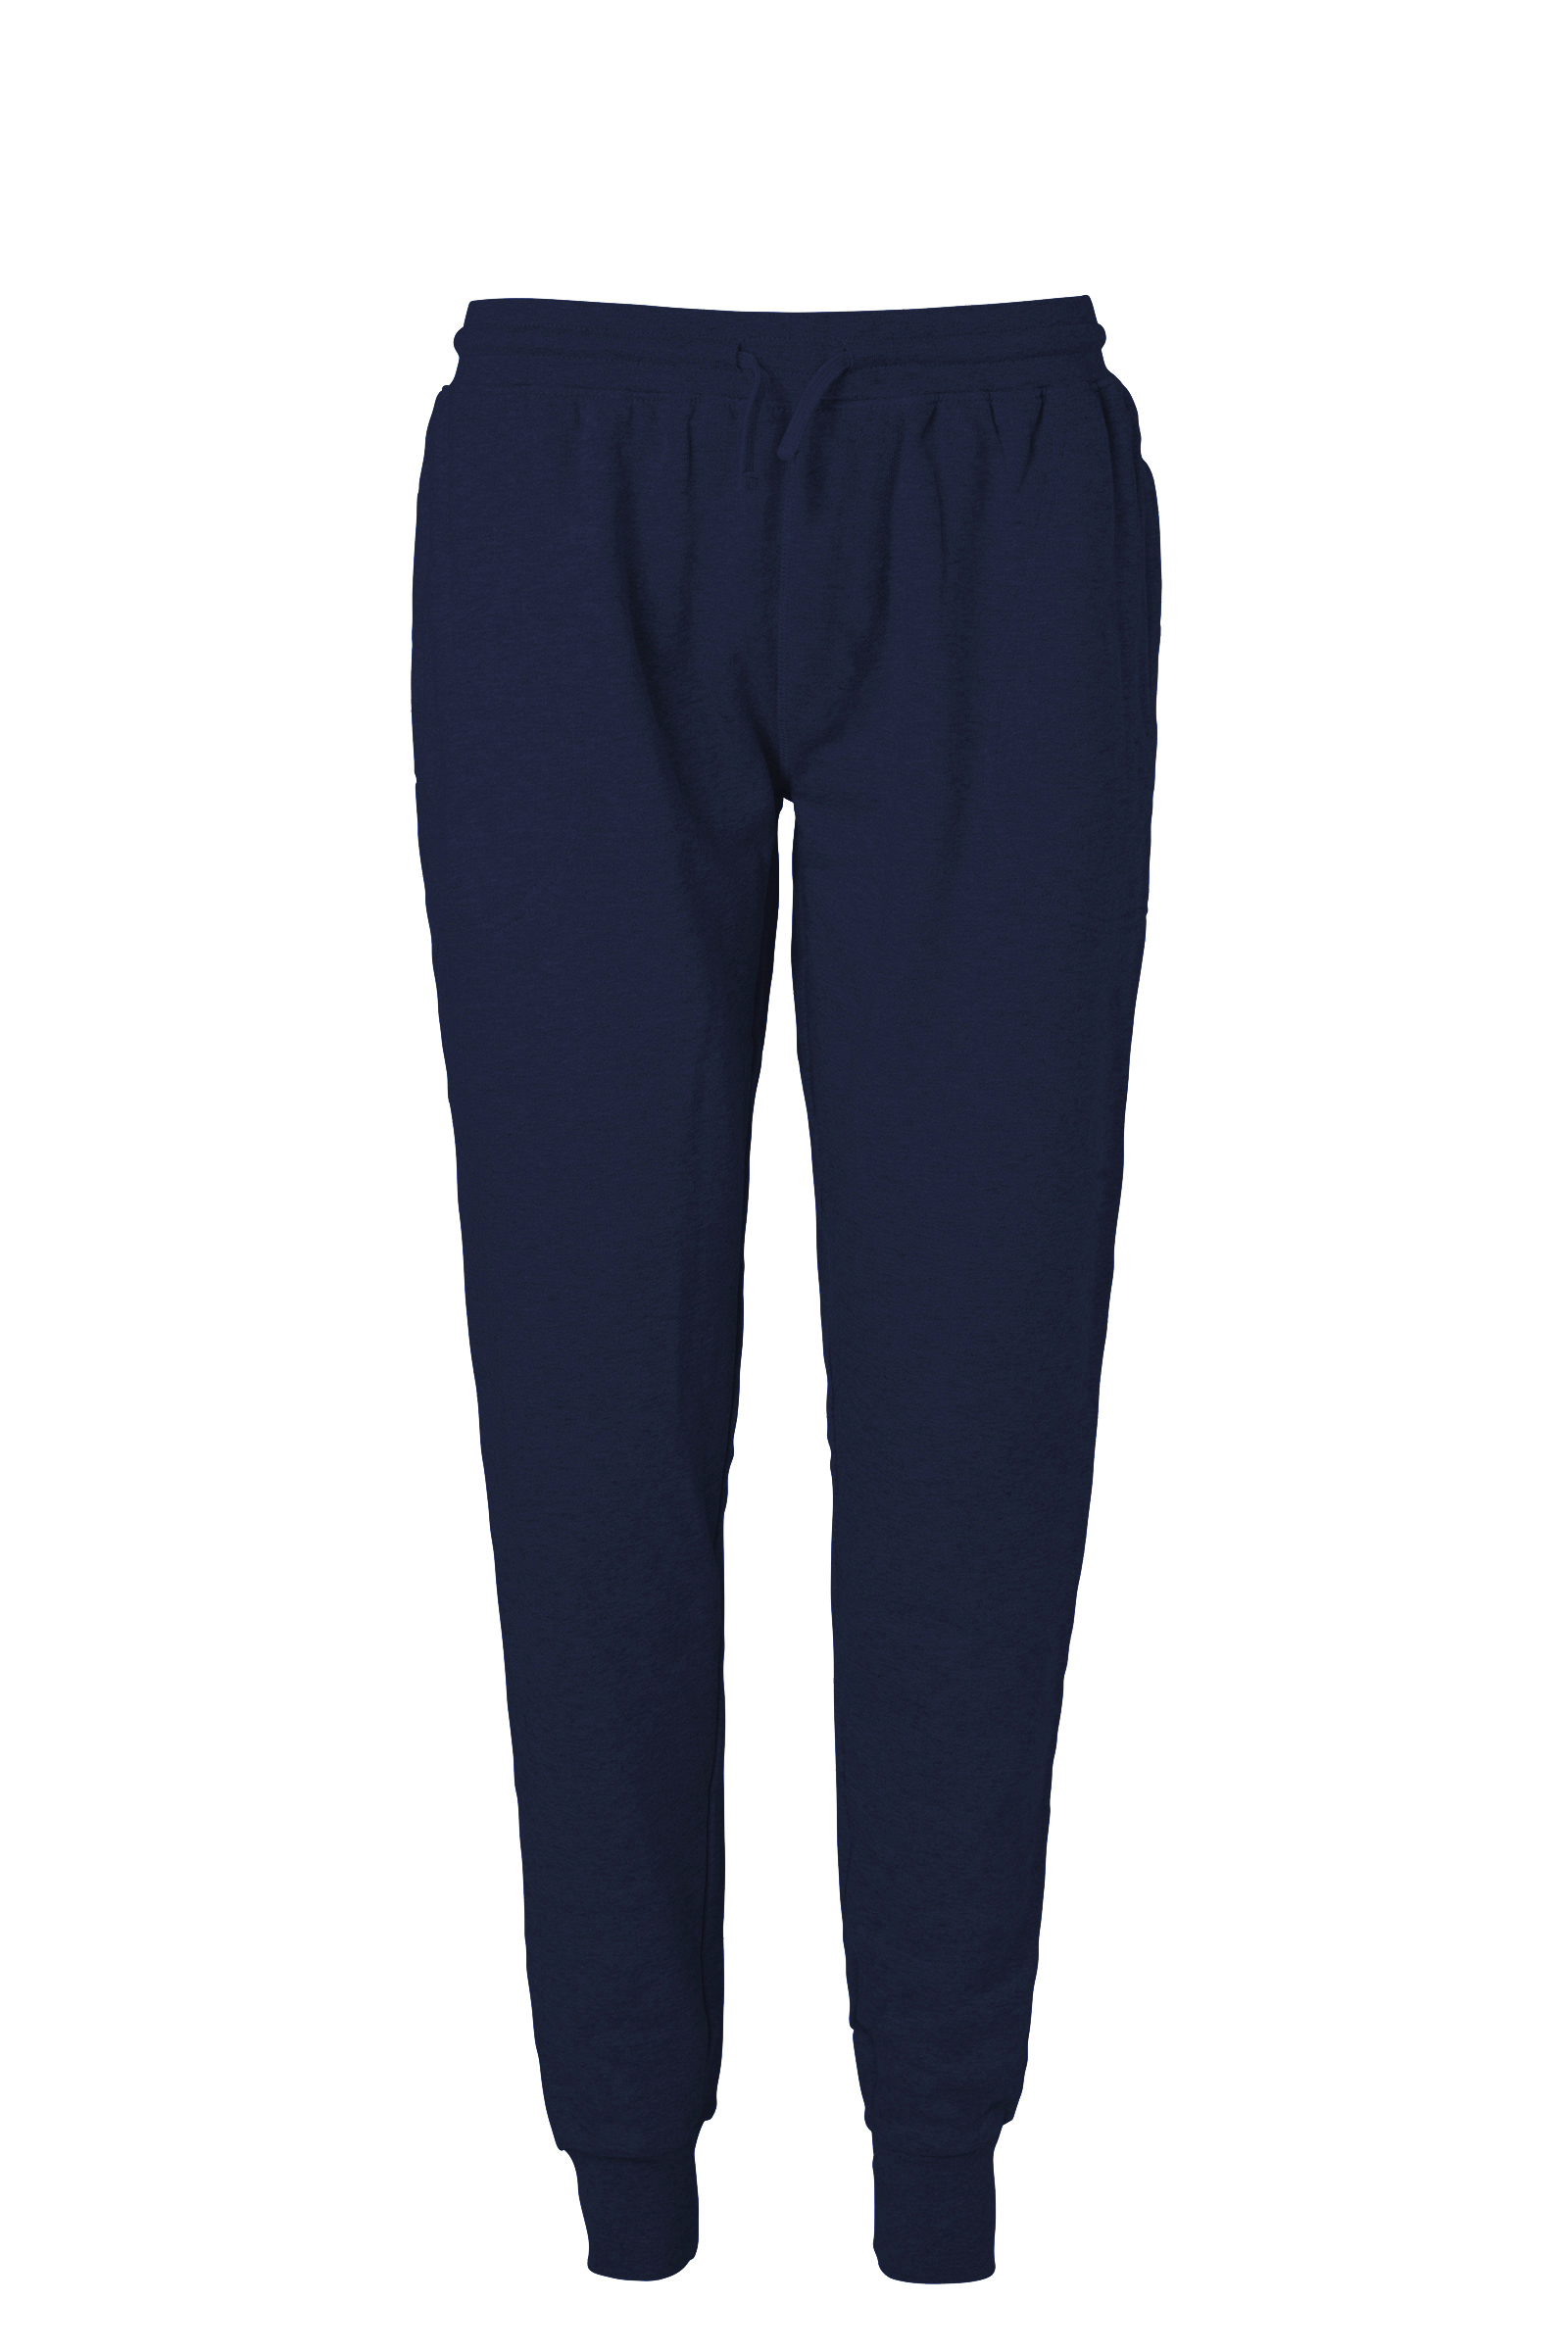 Organic Fairtrade Unisex Sweatpants with Cuff Neutral® Navy S